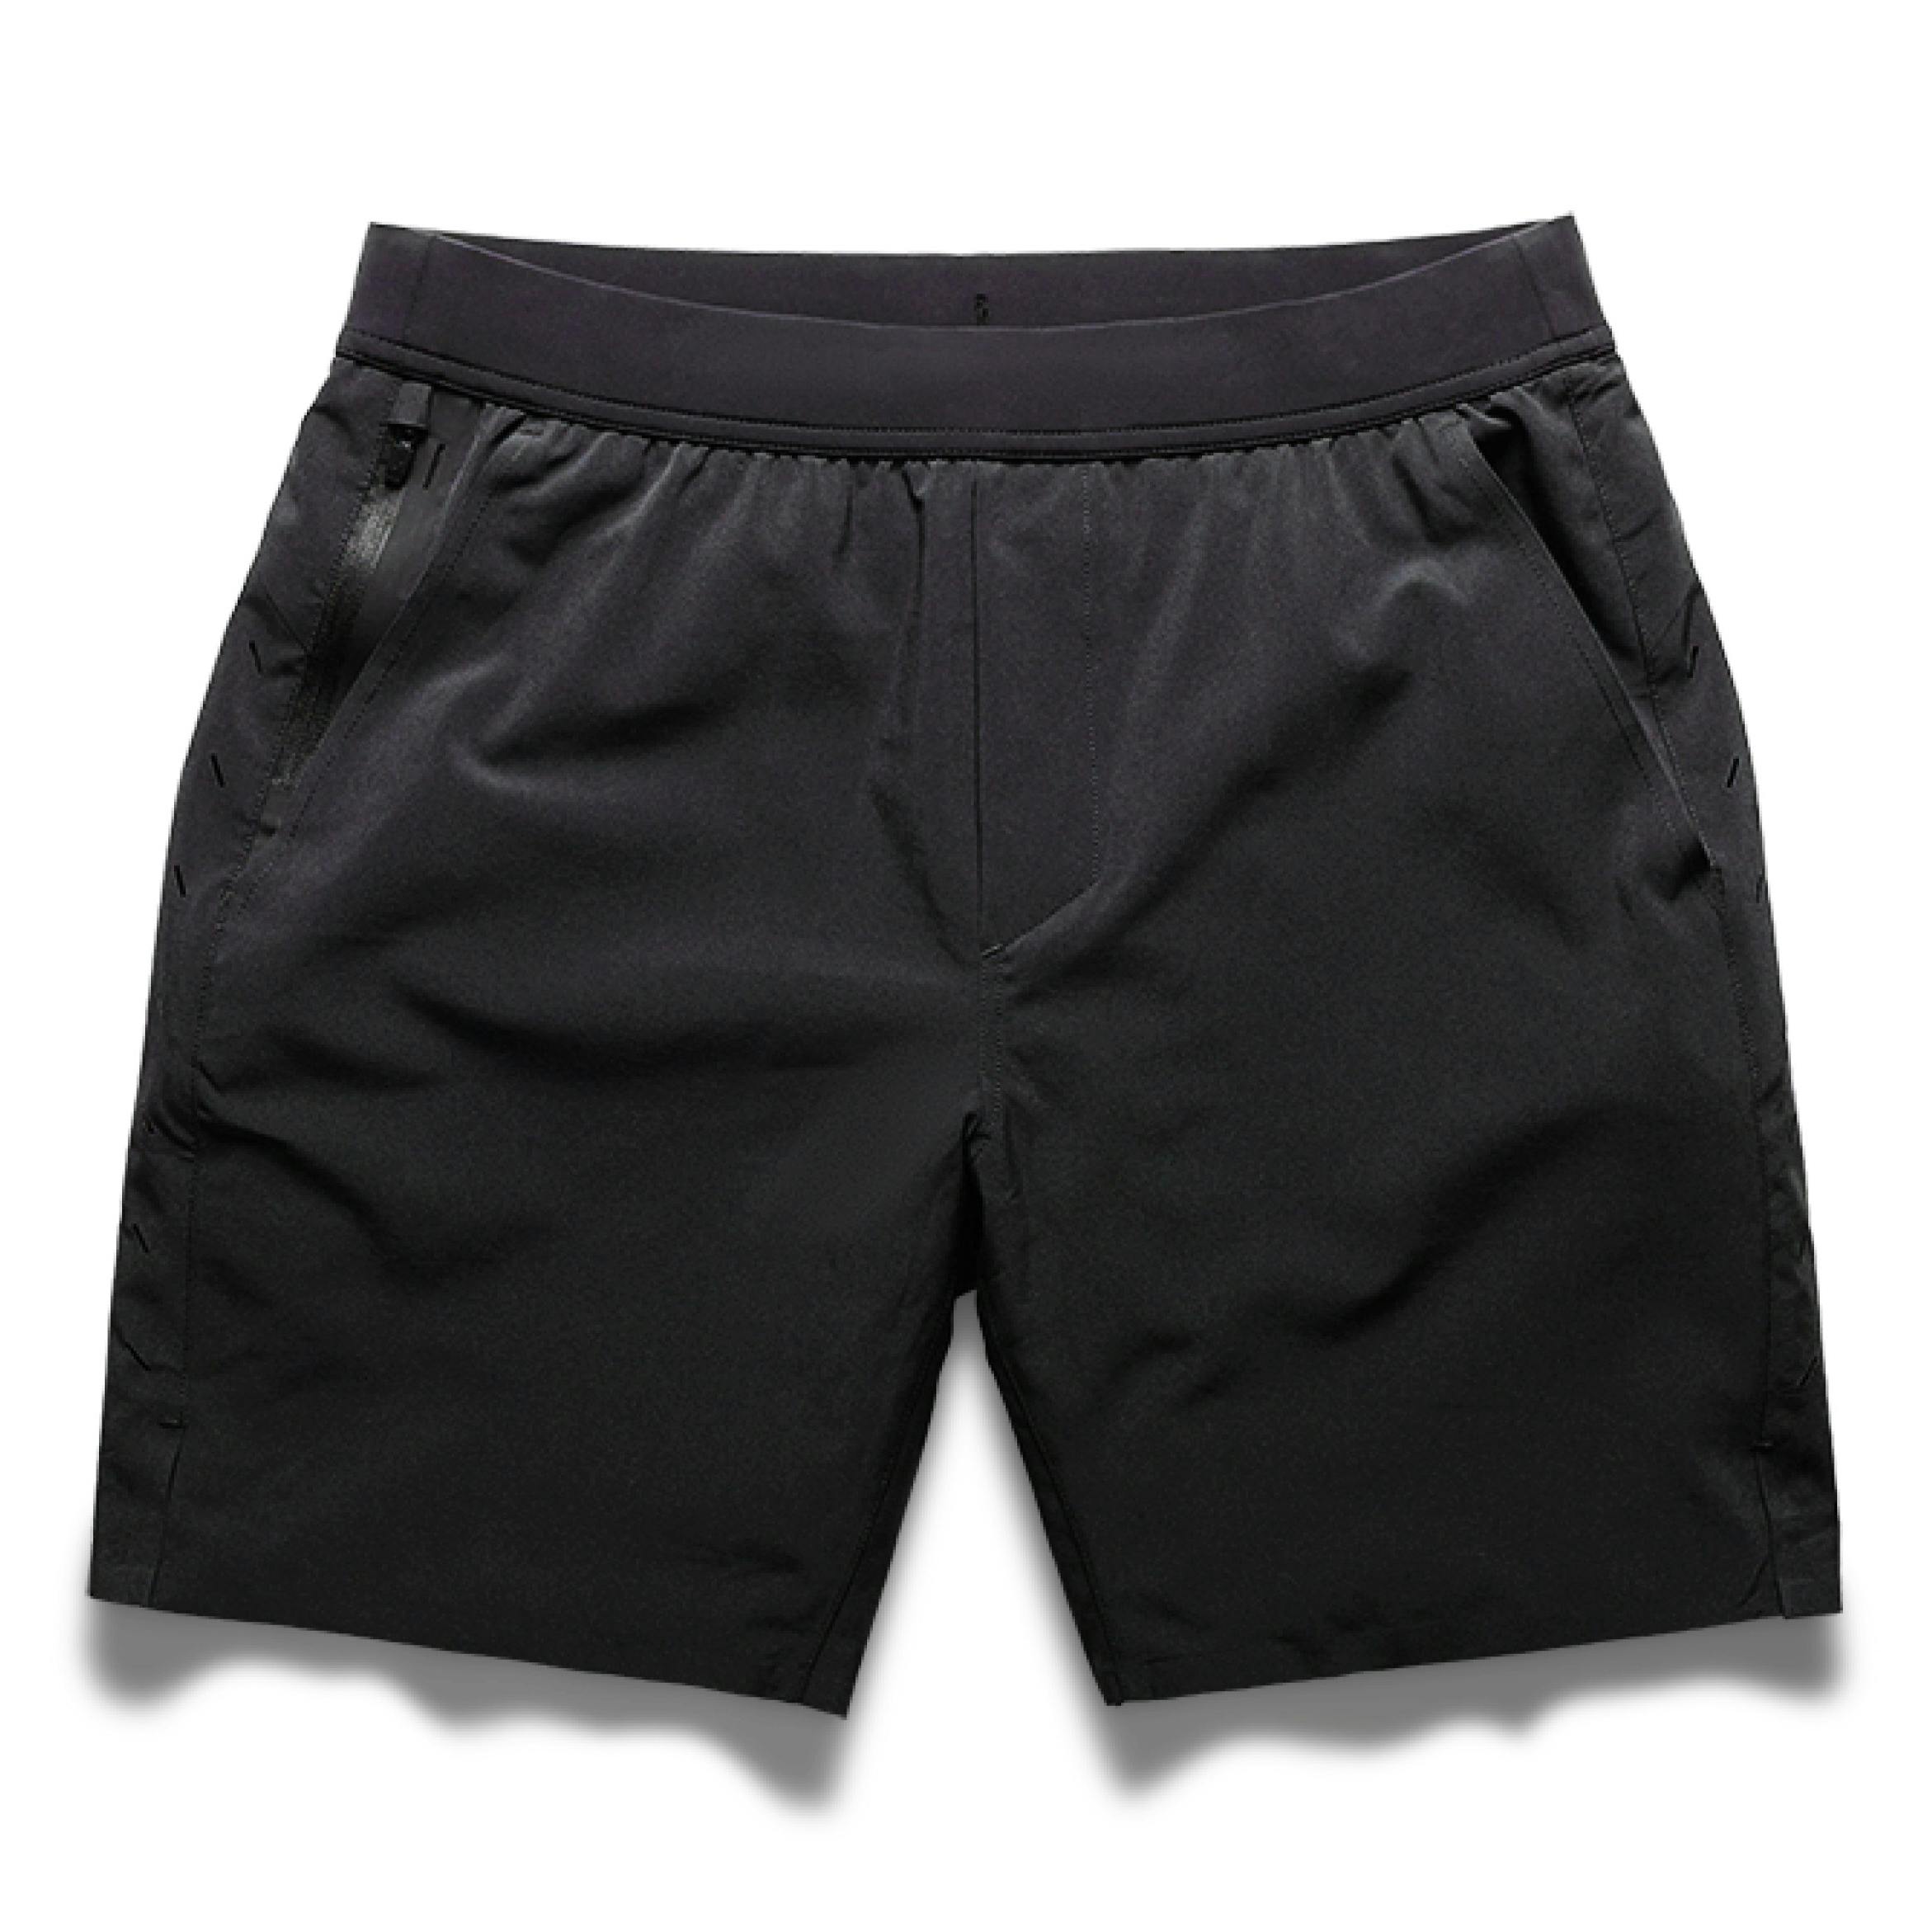 Interval Short 7" with Liner